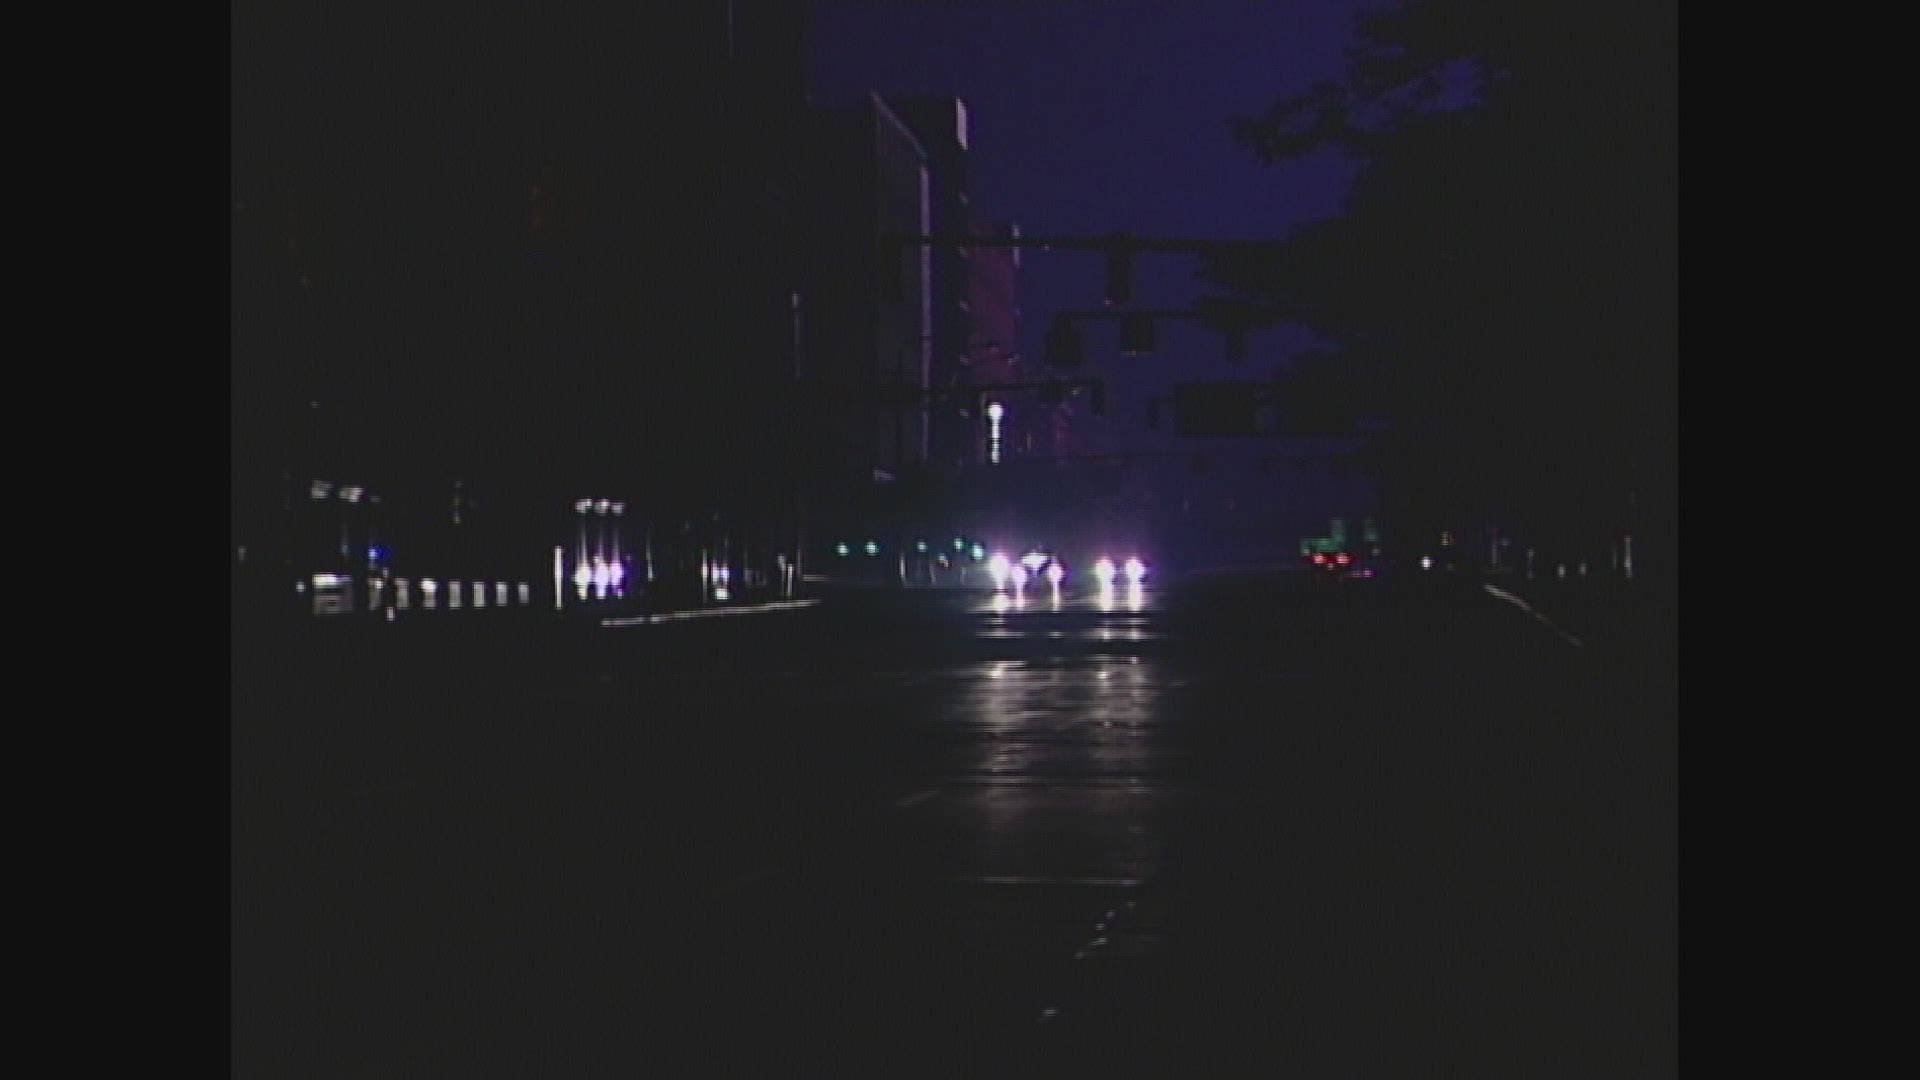 Aug. 14, 2018: Today marks 15 years since millions of Americans were impacted by the big blackout. Here's archive footage to show how that day impacted Northeast Ohio.